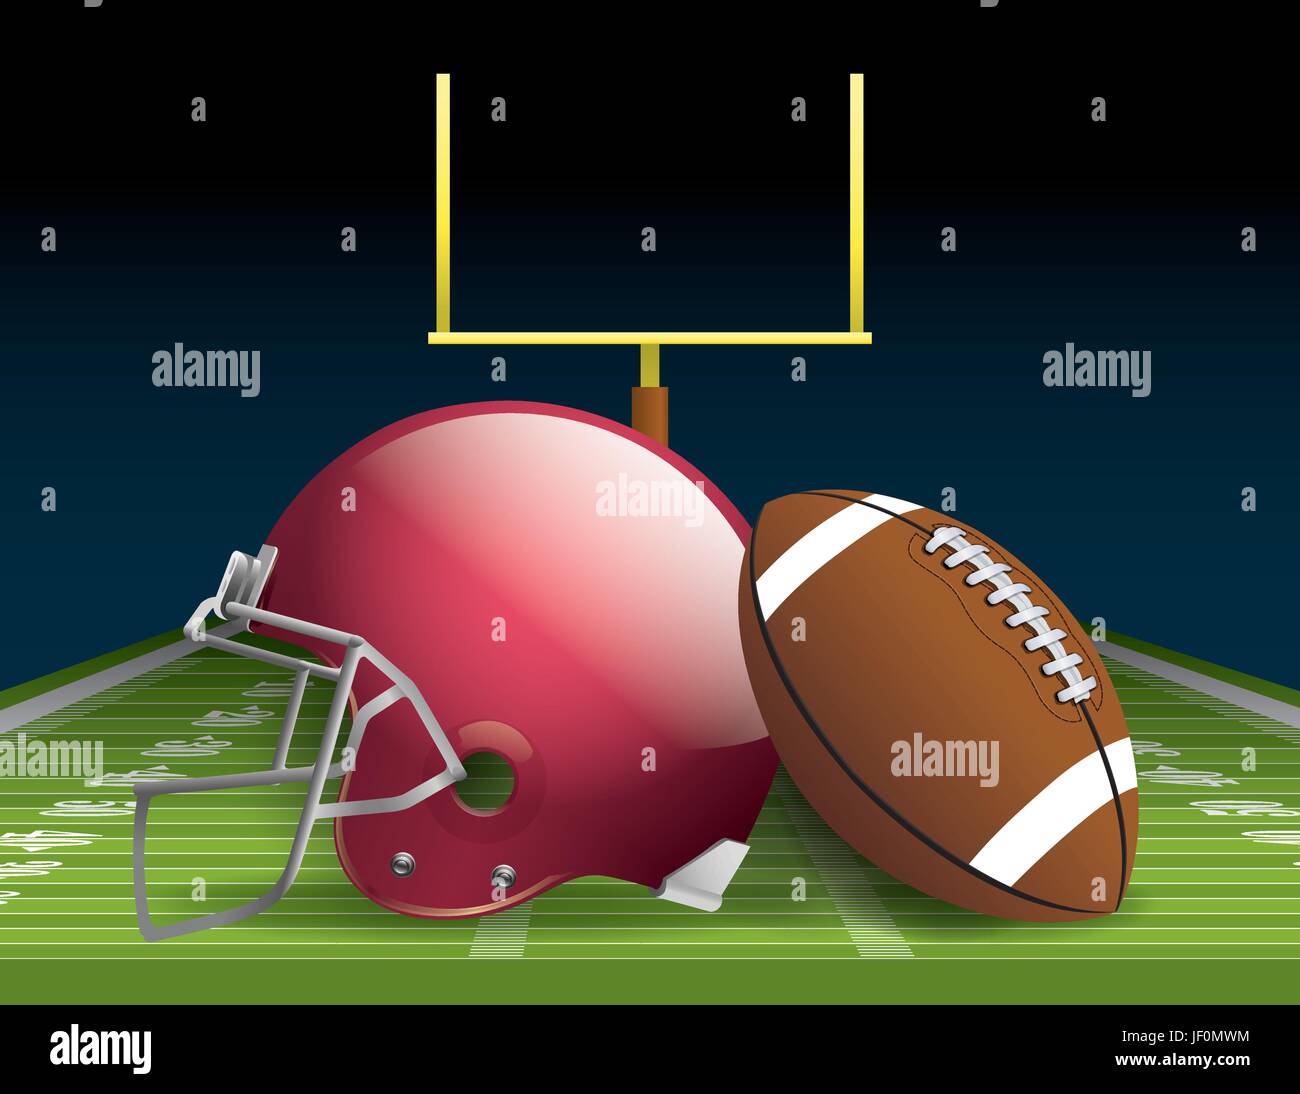 sport, sports, game, tournament, play, playing, plays, played, american, field, Stock Vector